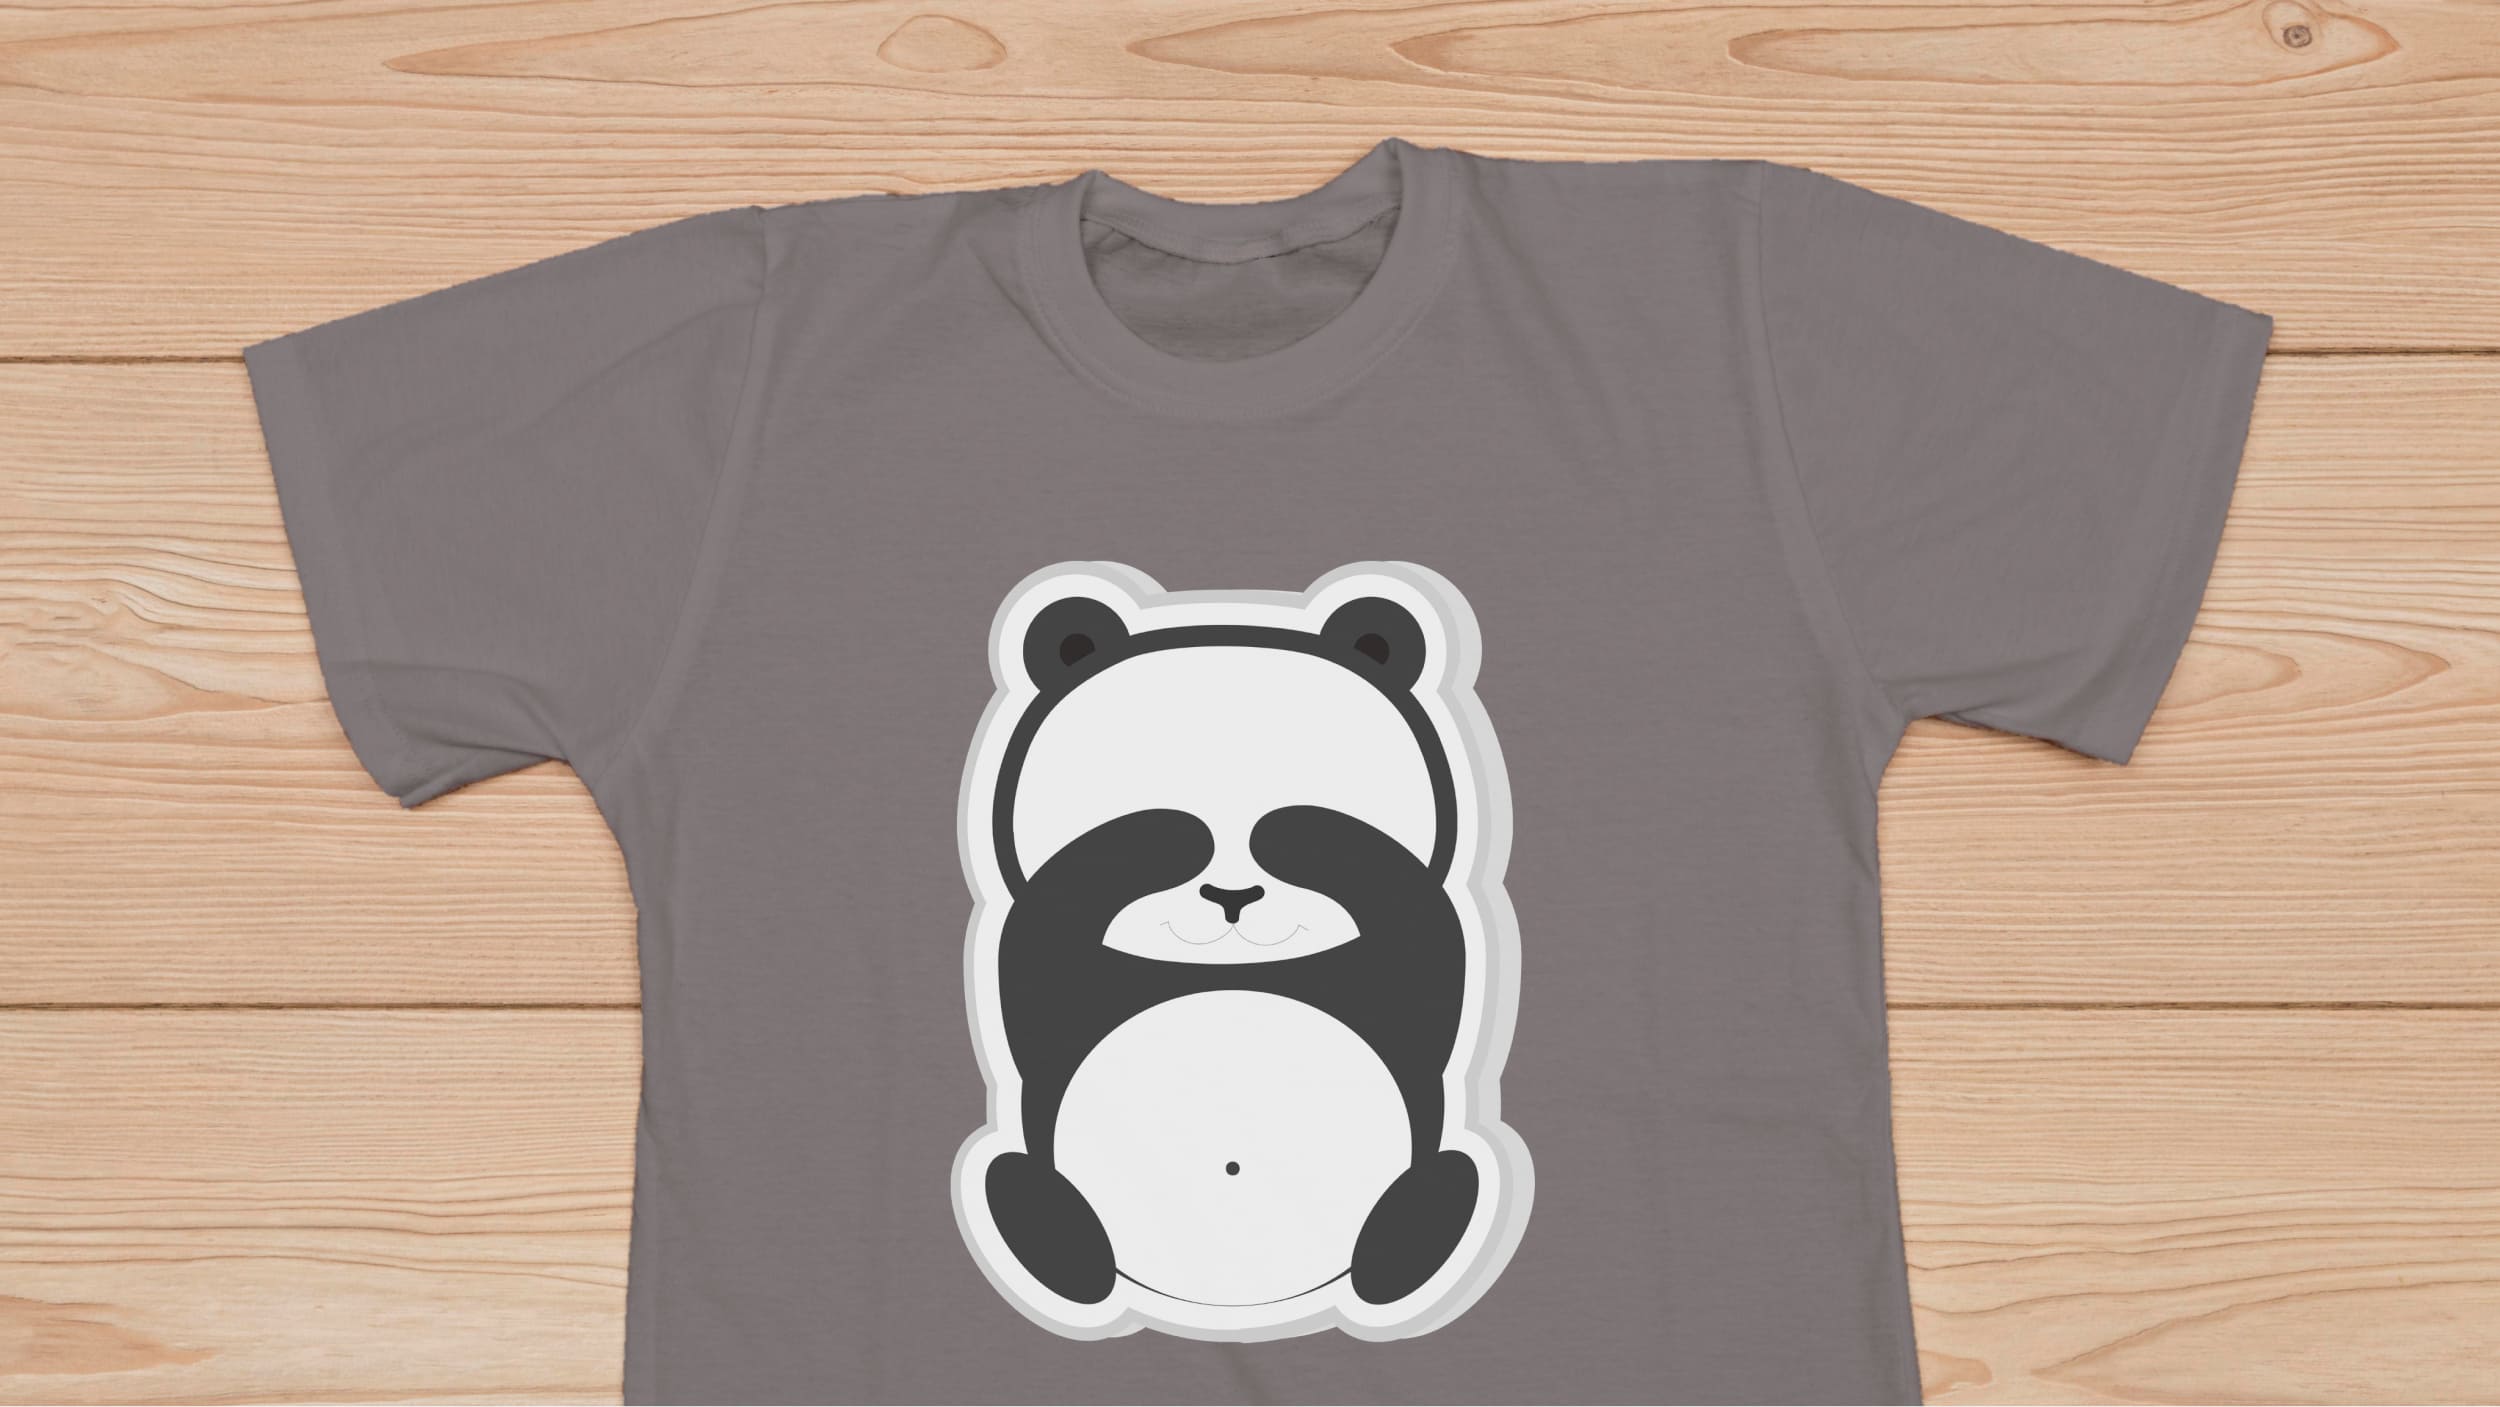 Gray t-shirt with a sad panda bear on a wooden background.